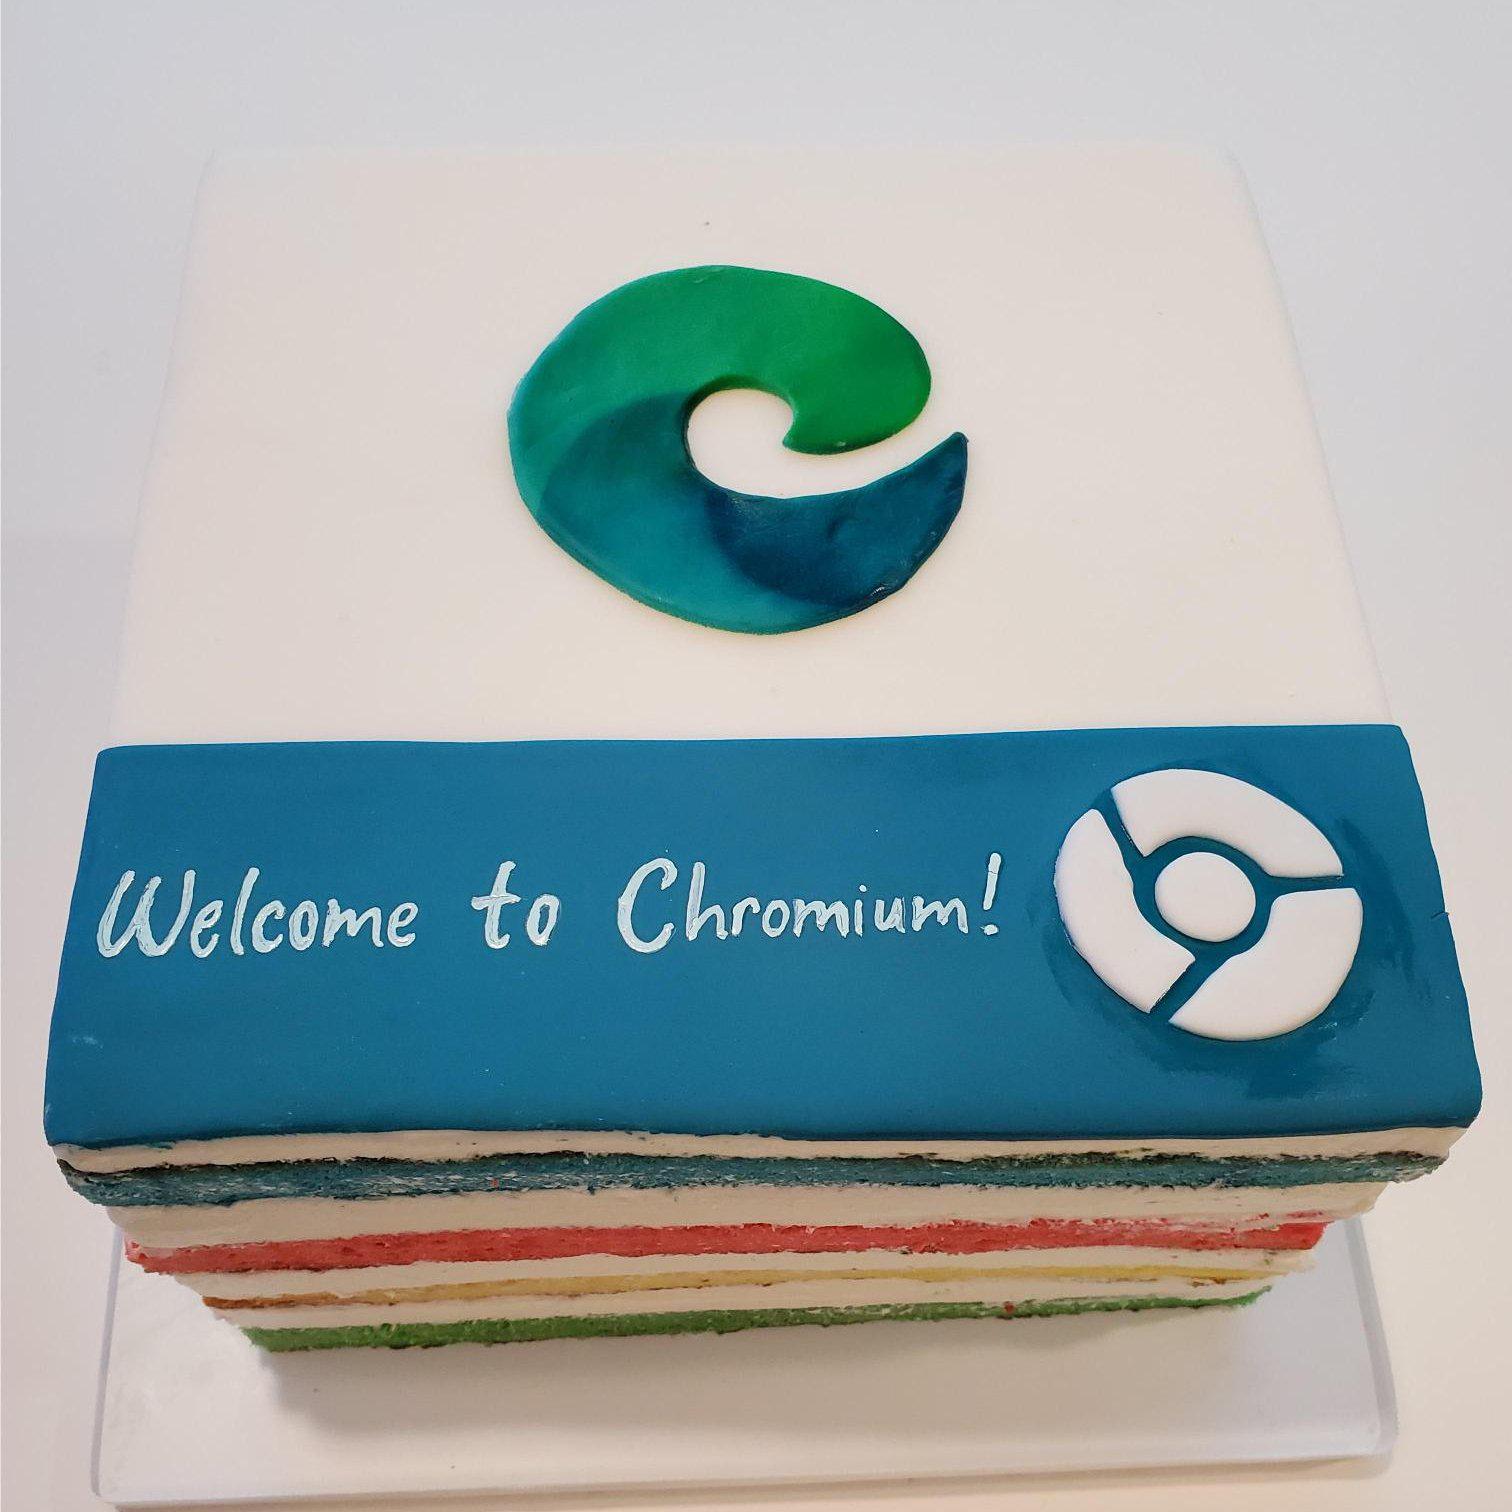 A cake sent by Google to Microsoft for the release of the first Chromium-based version of Edge